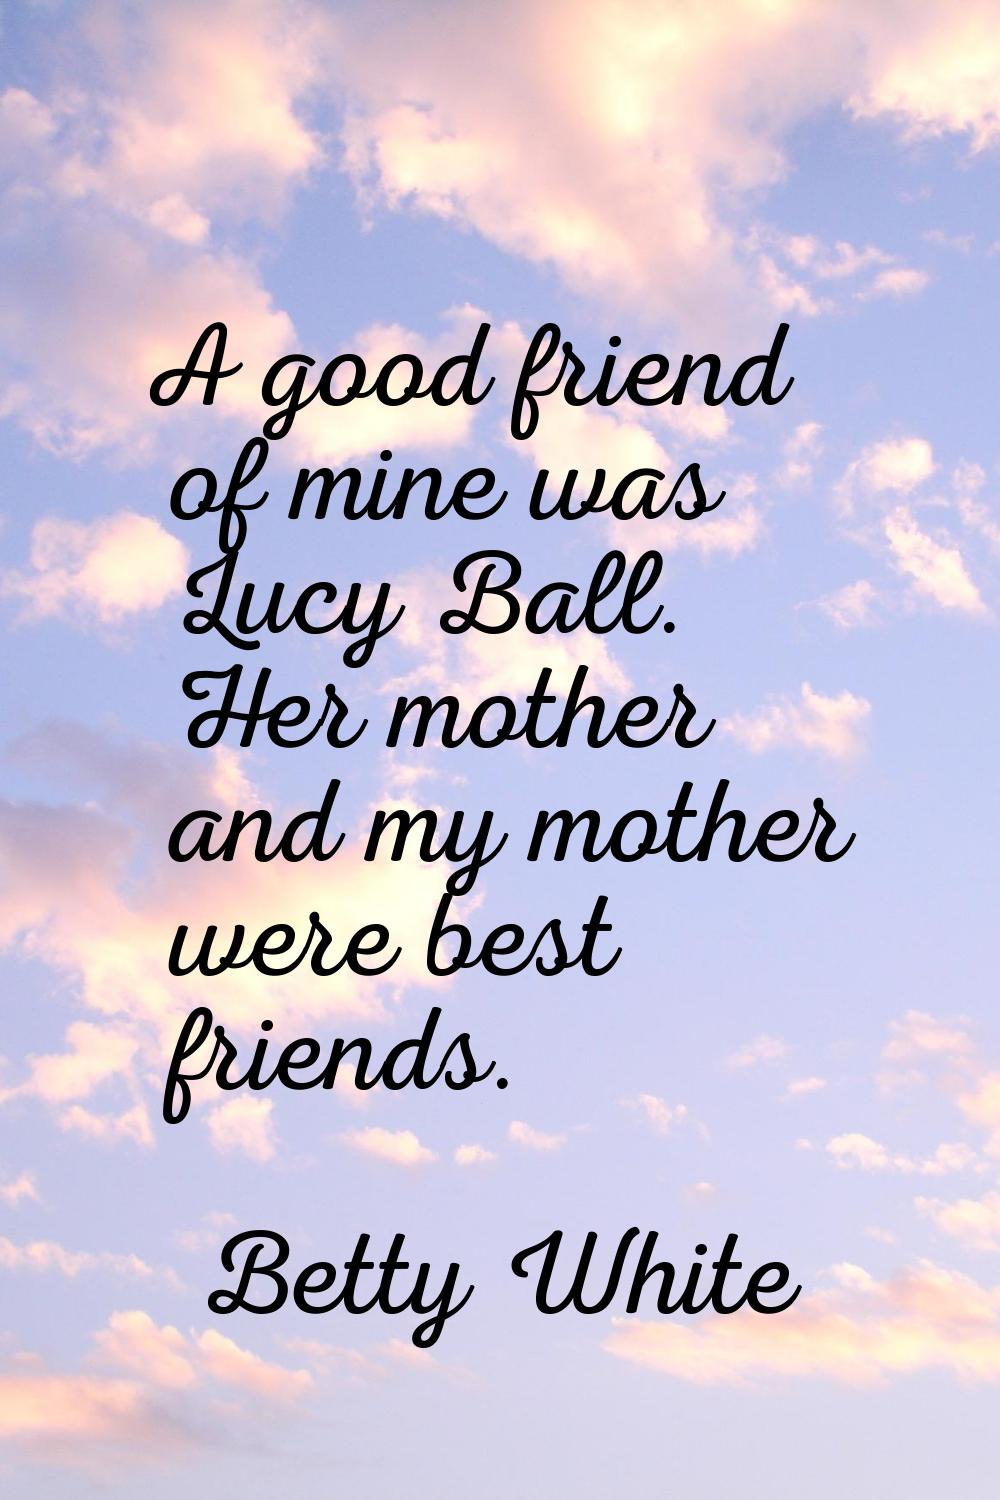 A good friend of mine was Lucy Ball. Her mother and my mother were best friends.